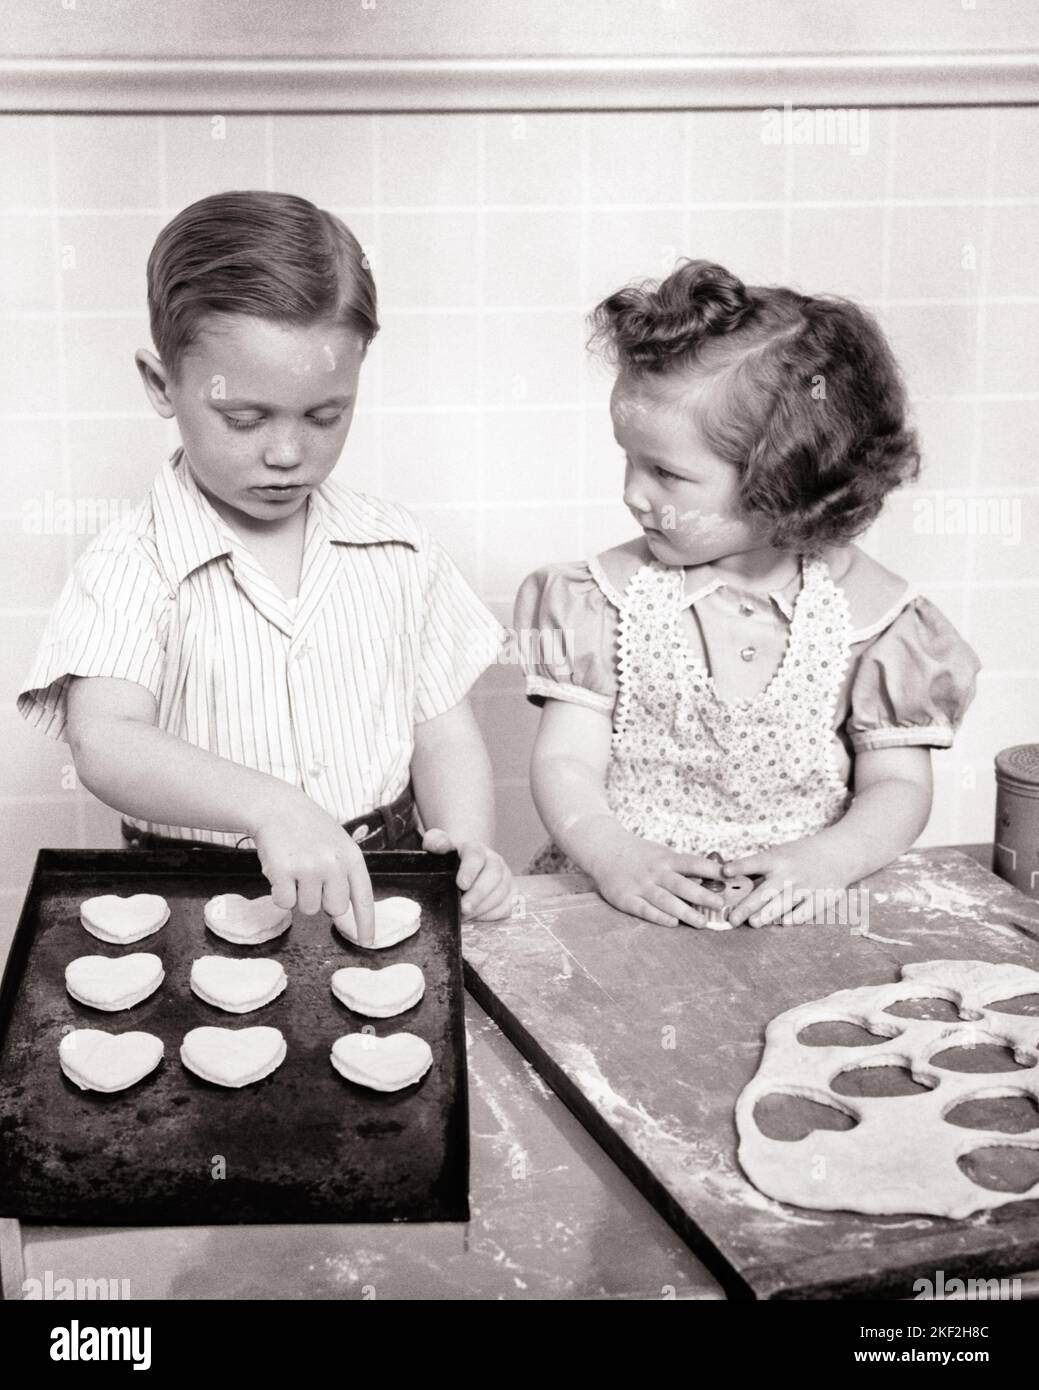 1940s HUMOR BOY AND GIRL IN KITCHEN MAKING HEART-SHAPED VALENTINE COOKIES BOY FOCUSED ON COOKIES GIRL FOCUSED ON BOY - v15 HAR001 HARS STRONG JOY LIFESTYLE SATISFACTION FEMALES STUDIO SHOT HOME LIFE COPY SPACE FRIENDSHIP HALF-LENGTH PERSONS THOUGHTFUL INSPIRATION CARING MALES COOKIES VALENTINES SAINT B&W GOALS HAPPINESS HIGH ANGLE VALENTINE'S TO RELATIONSHIPS CONNECTION CONCEPTUAL FEBRUARY FRIENDLY ST. SINCERE PERSONAL ATTACHMENT SYMBOLIC AFFECTION COOPERATION CREATIVITY EMOTION FOCUSED GROWTH INTENSE JUVENILES TOGETHERNESS VALENTINES DAY BLACK AND WHITE CAREFUL CAUCASIAN ETHNICITY EARNEST Stock Photo